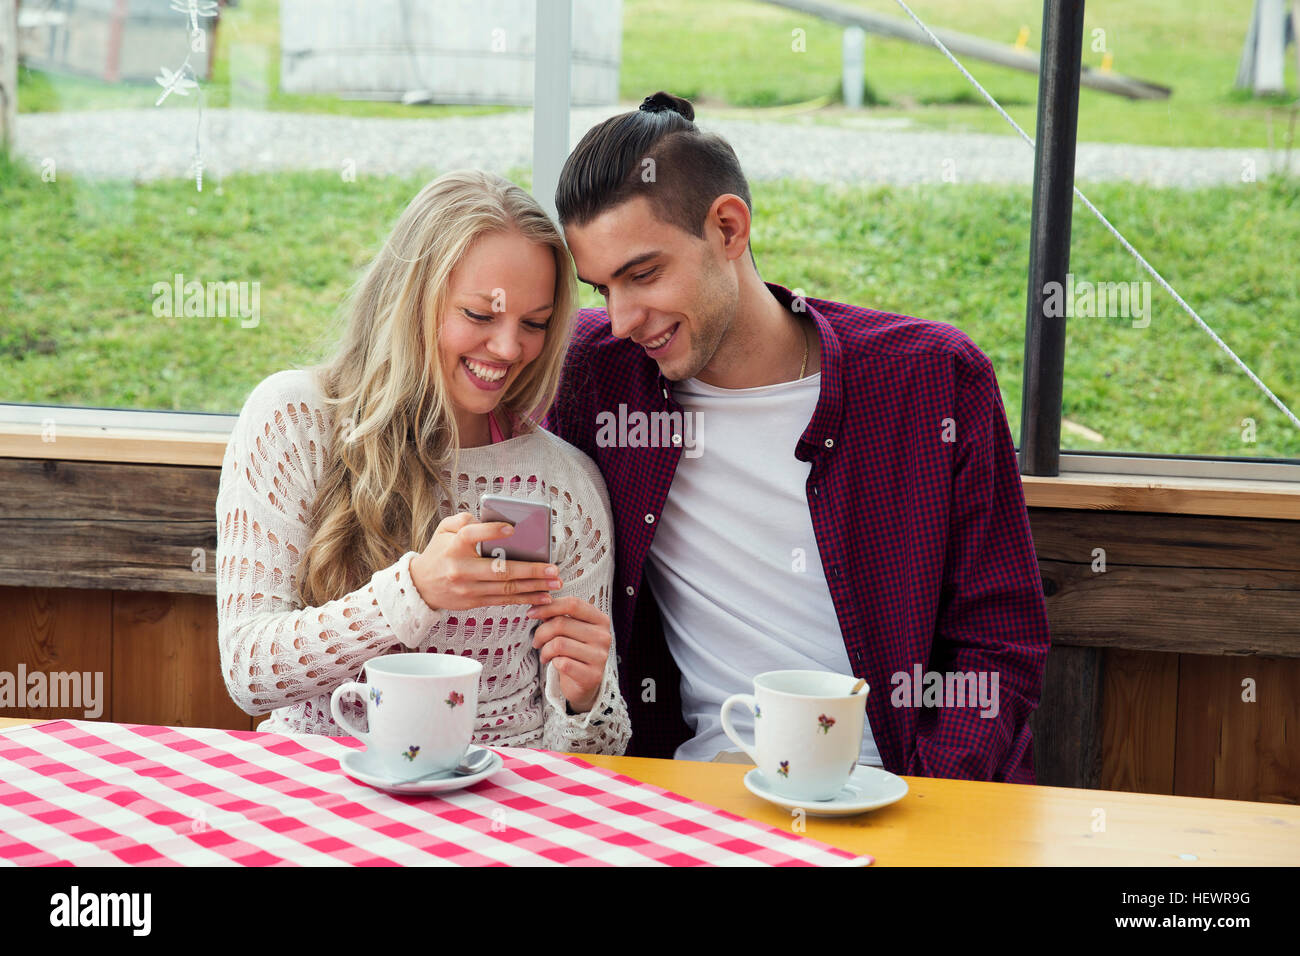 Young couple looking at smartphone update in cafe Stock Photo